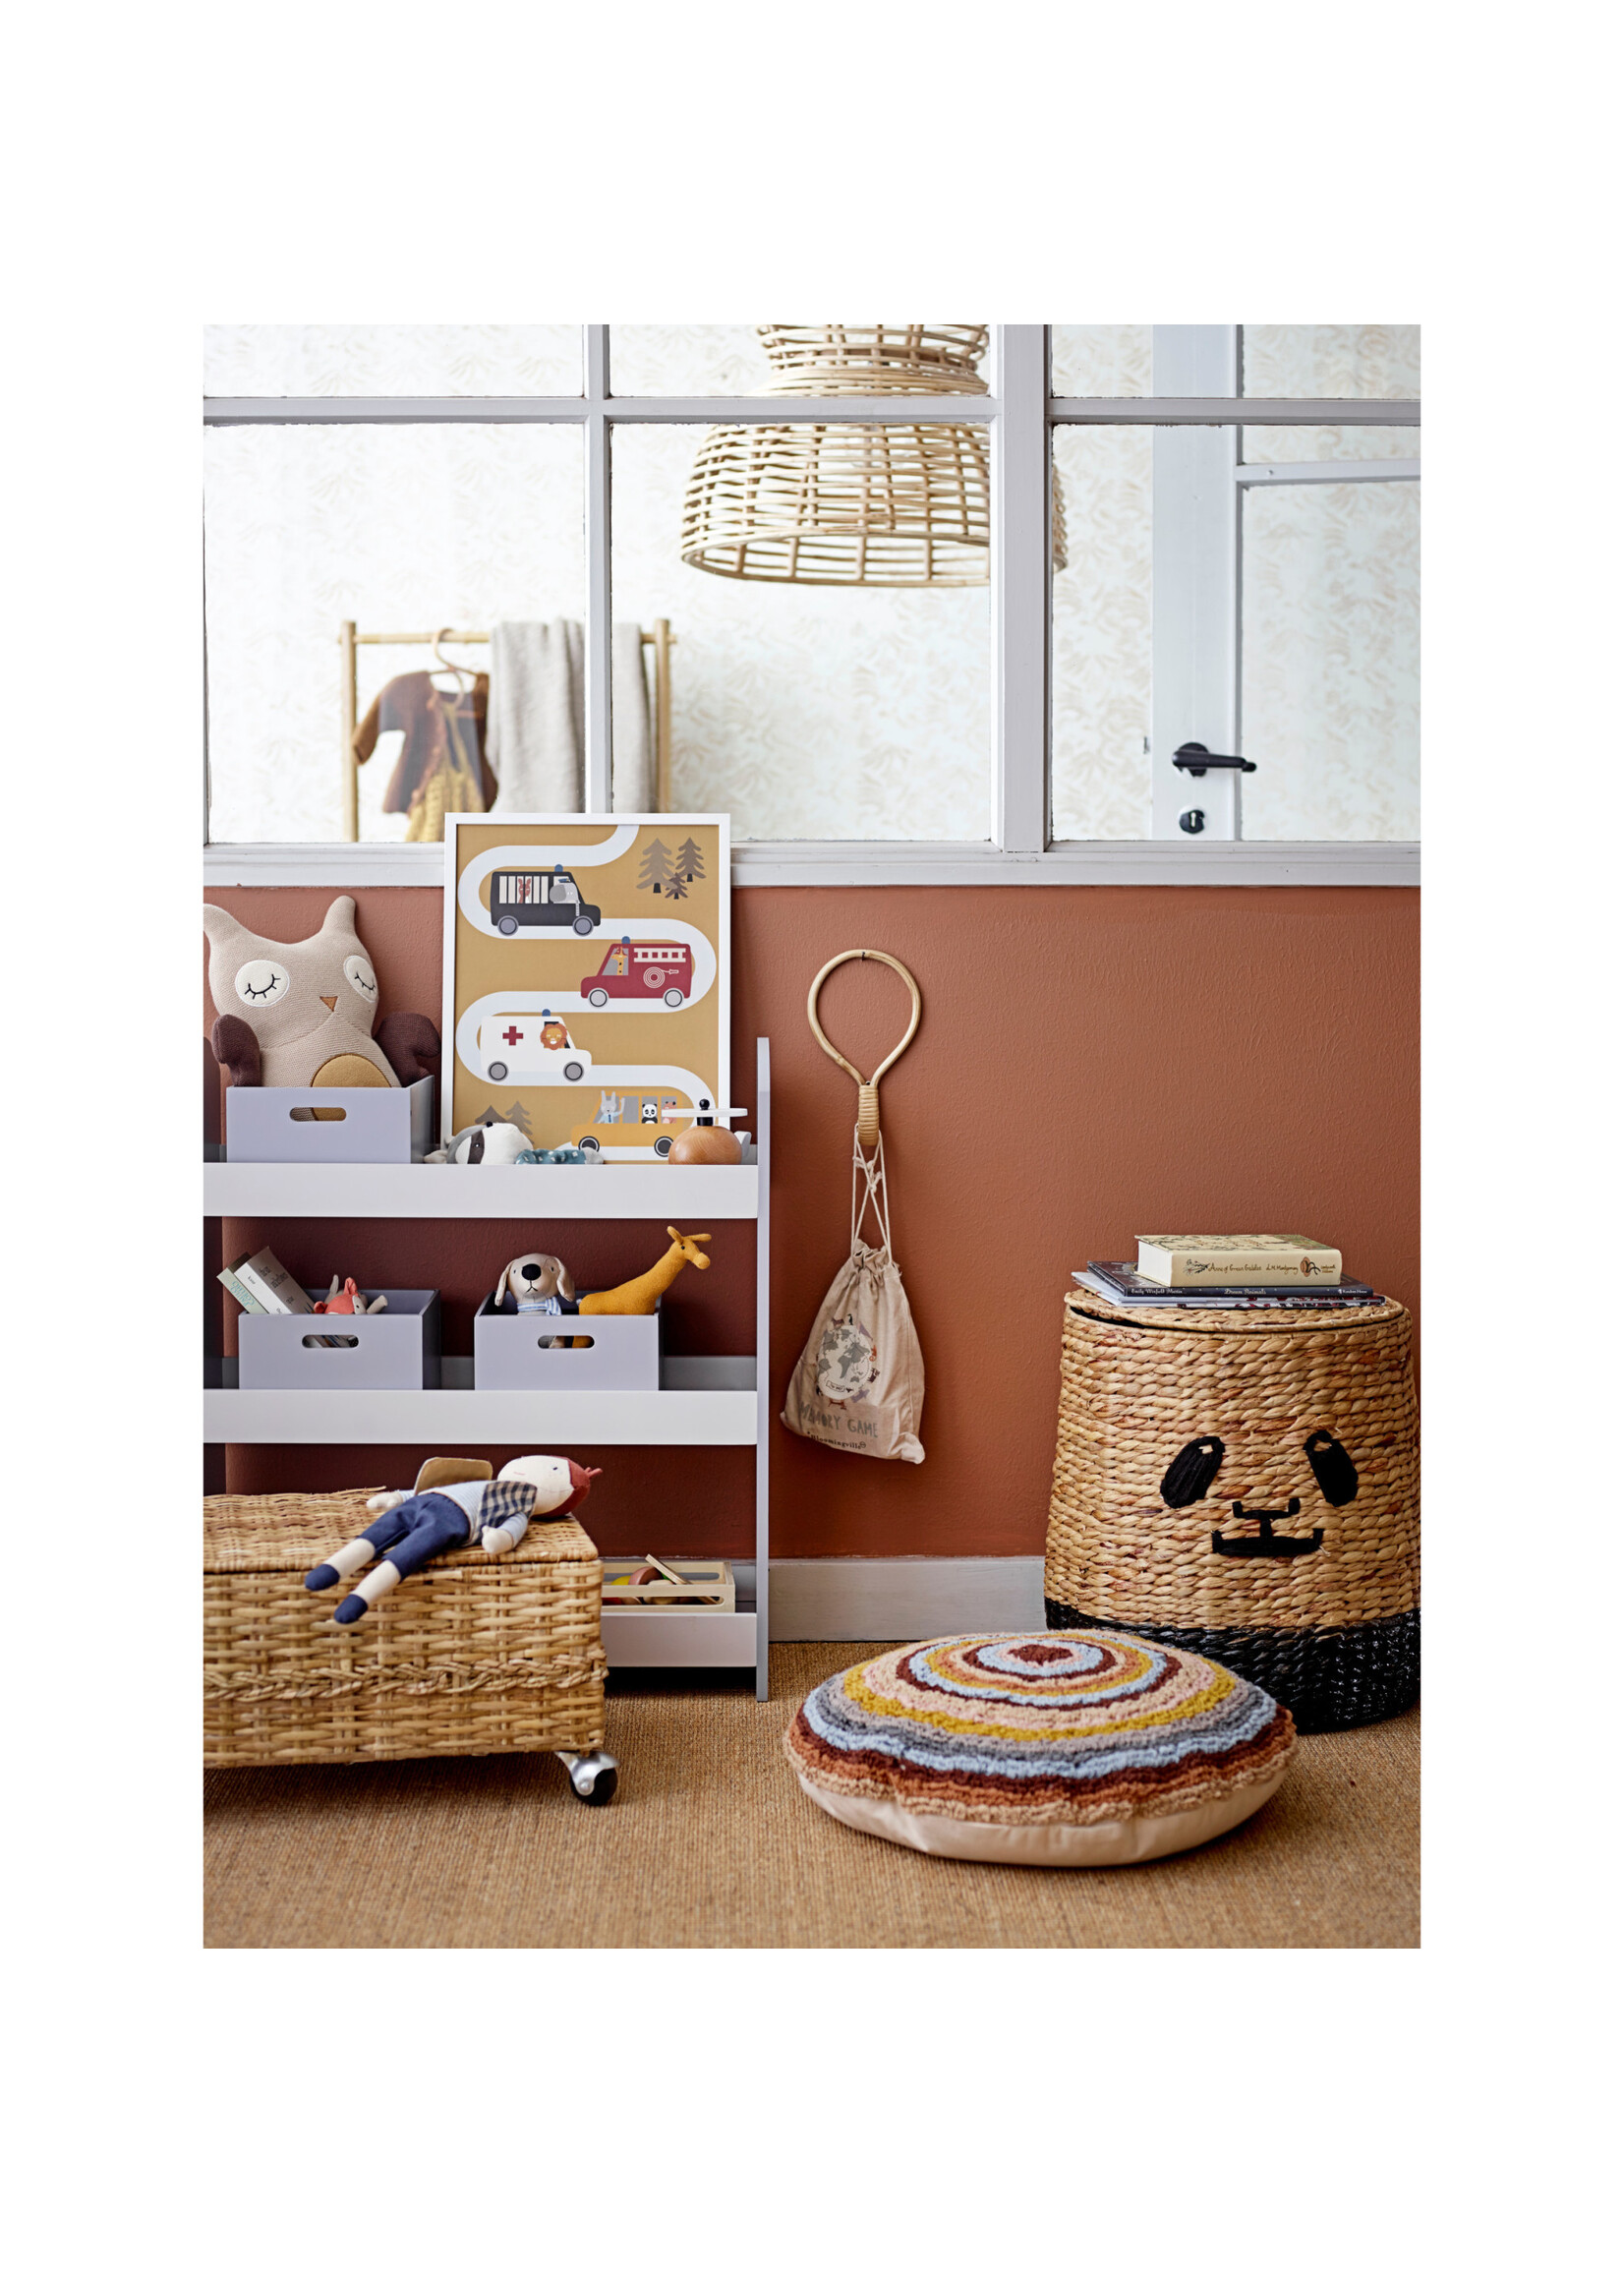 Rattan Basket with Lid and Panda Face Natural